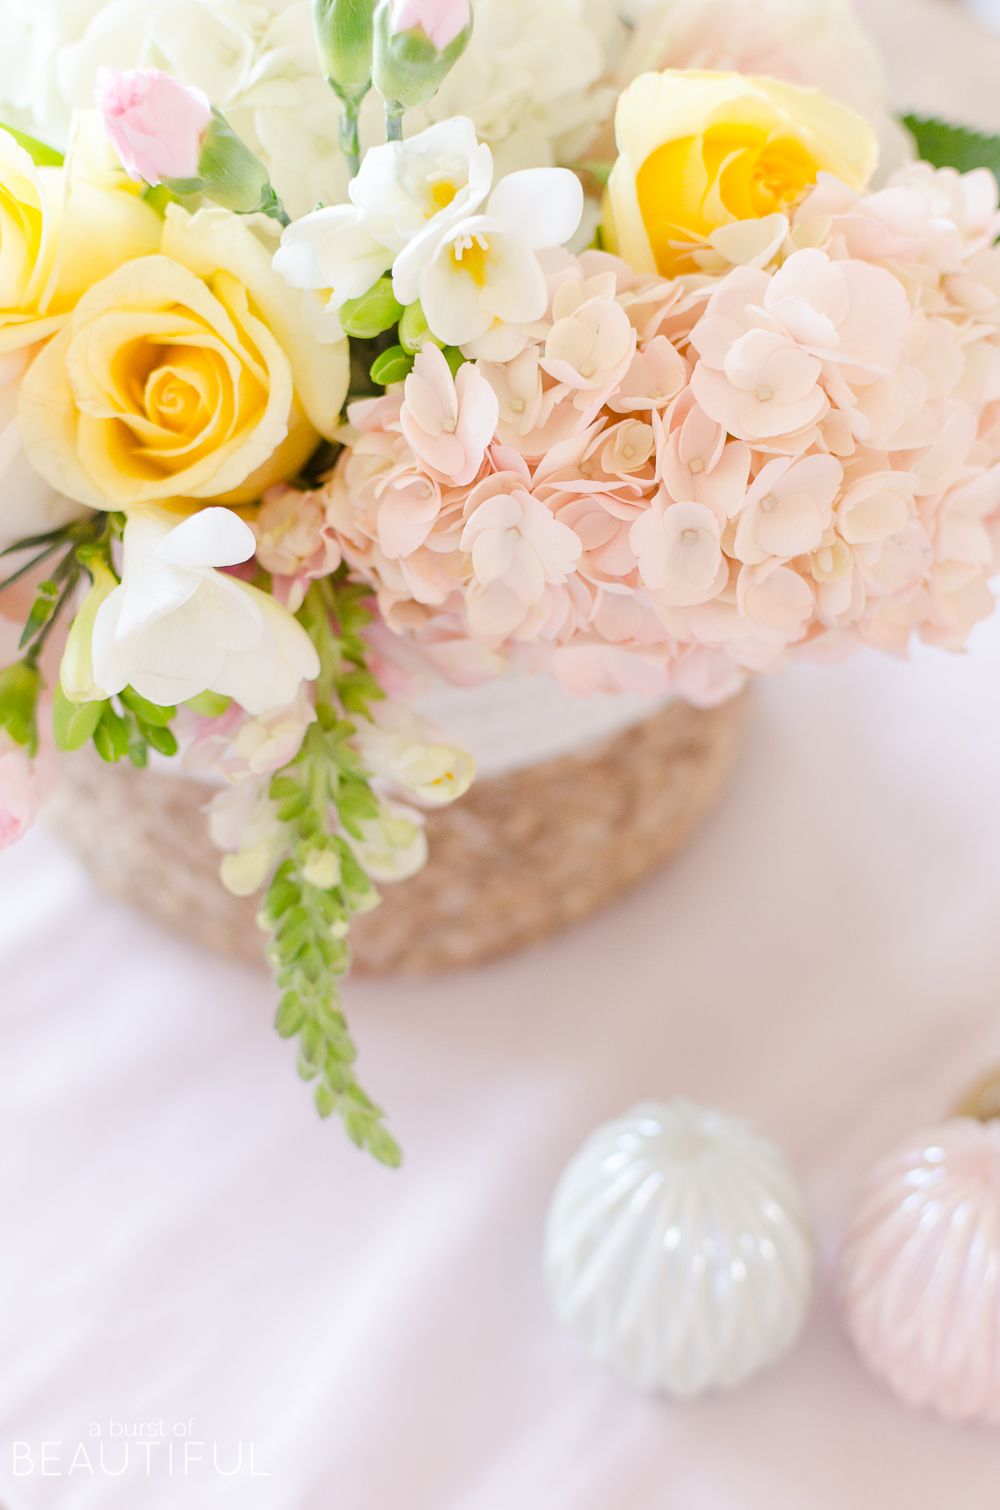 Host a beautiful Easter brunch or dinner with these colorful Easter tablescape and centerpiece ideas.